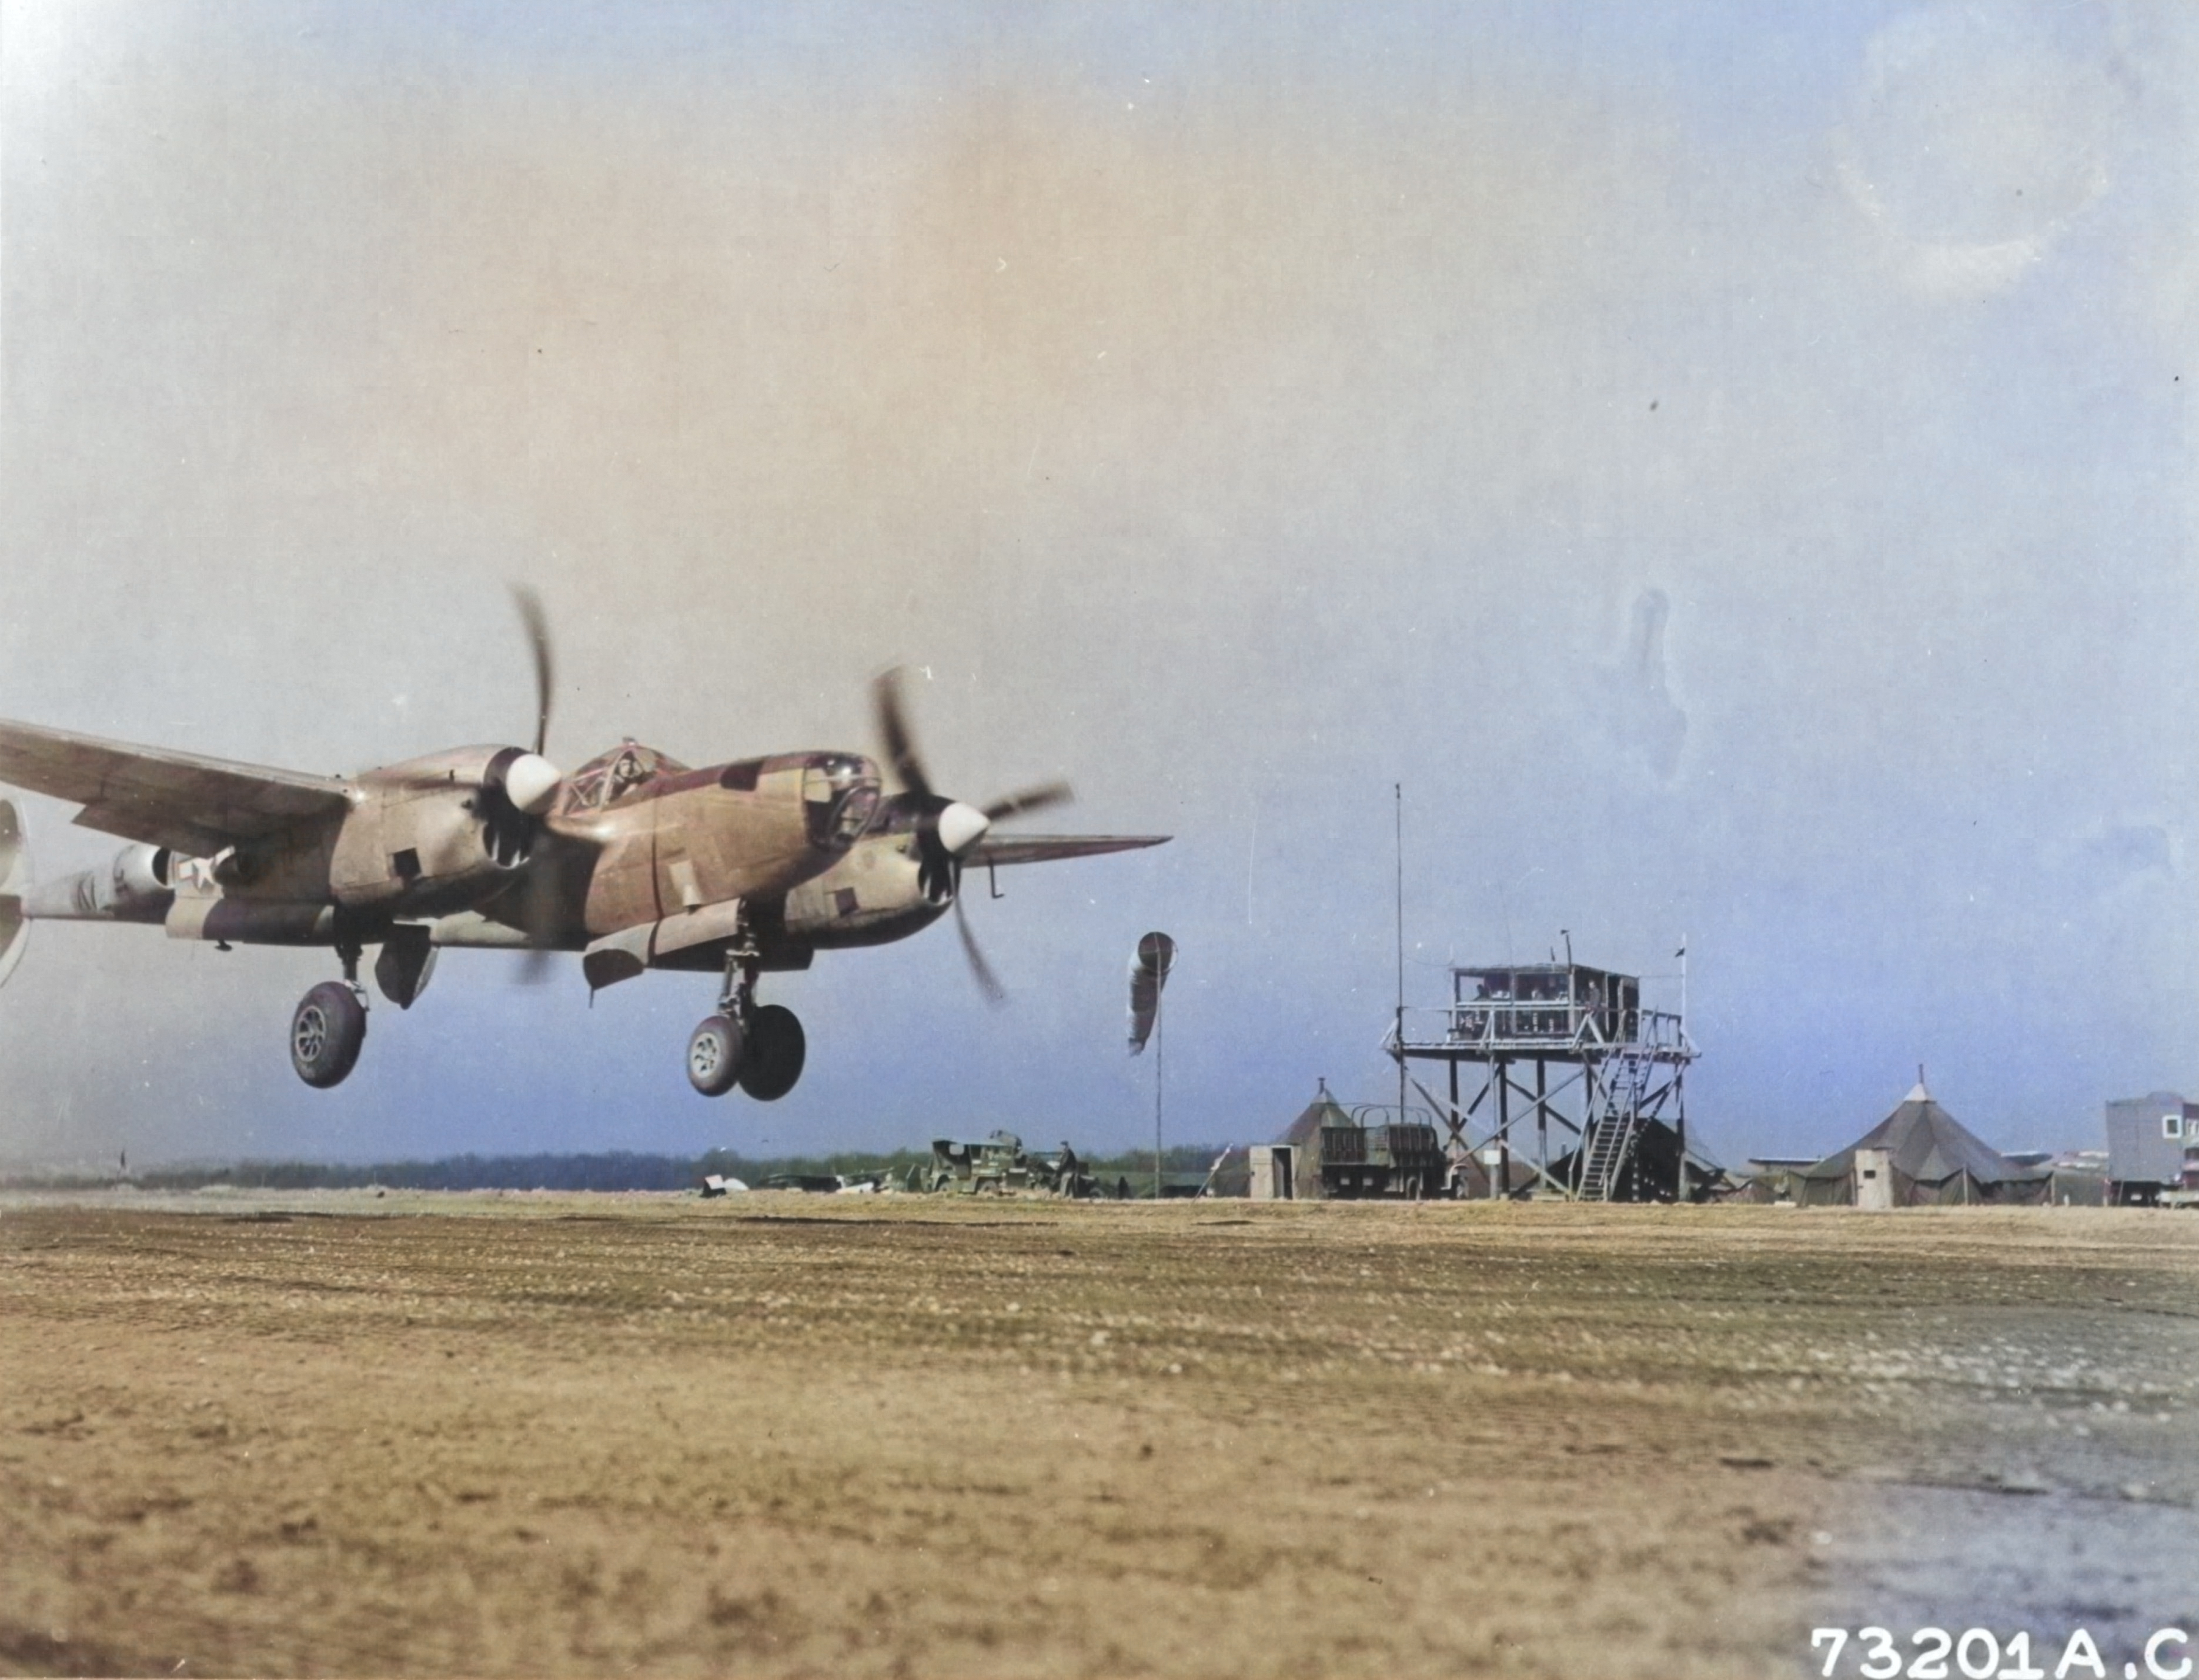 P-38J Lightning Droop Snoot with the 402nd Fighter Squadron coming in for a landing, possibly at Sandweiler, Luxembourg, Apr 10 1945. [Colorized by WW2DB]